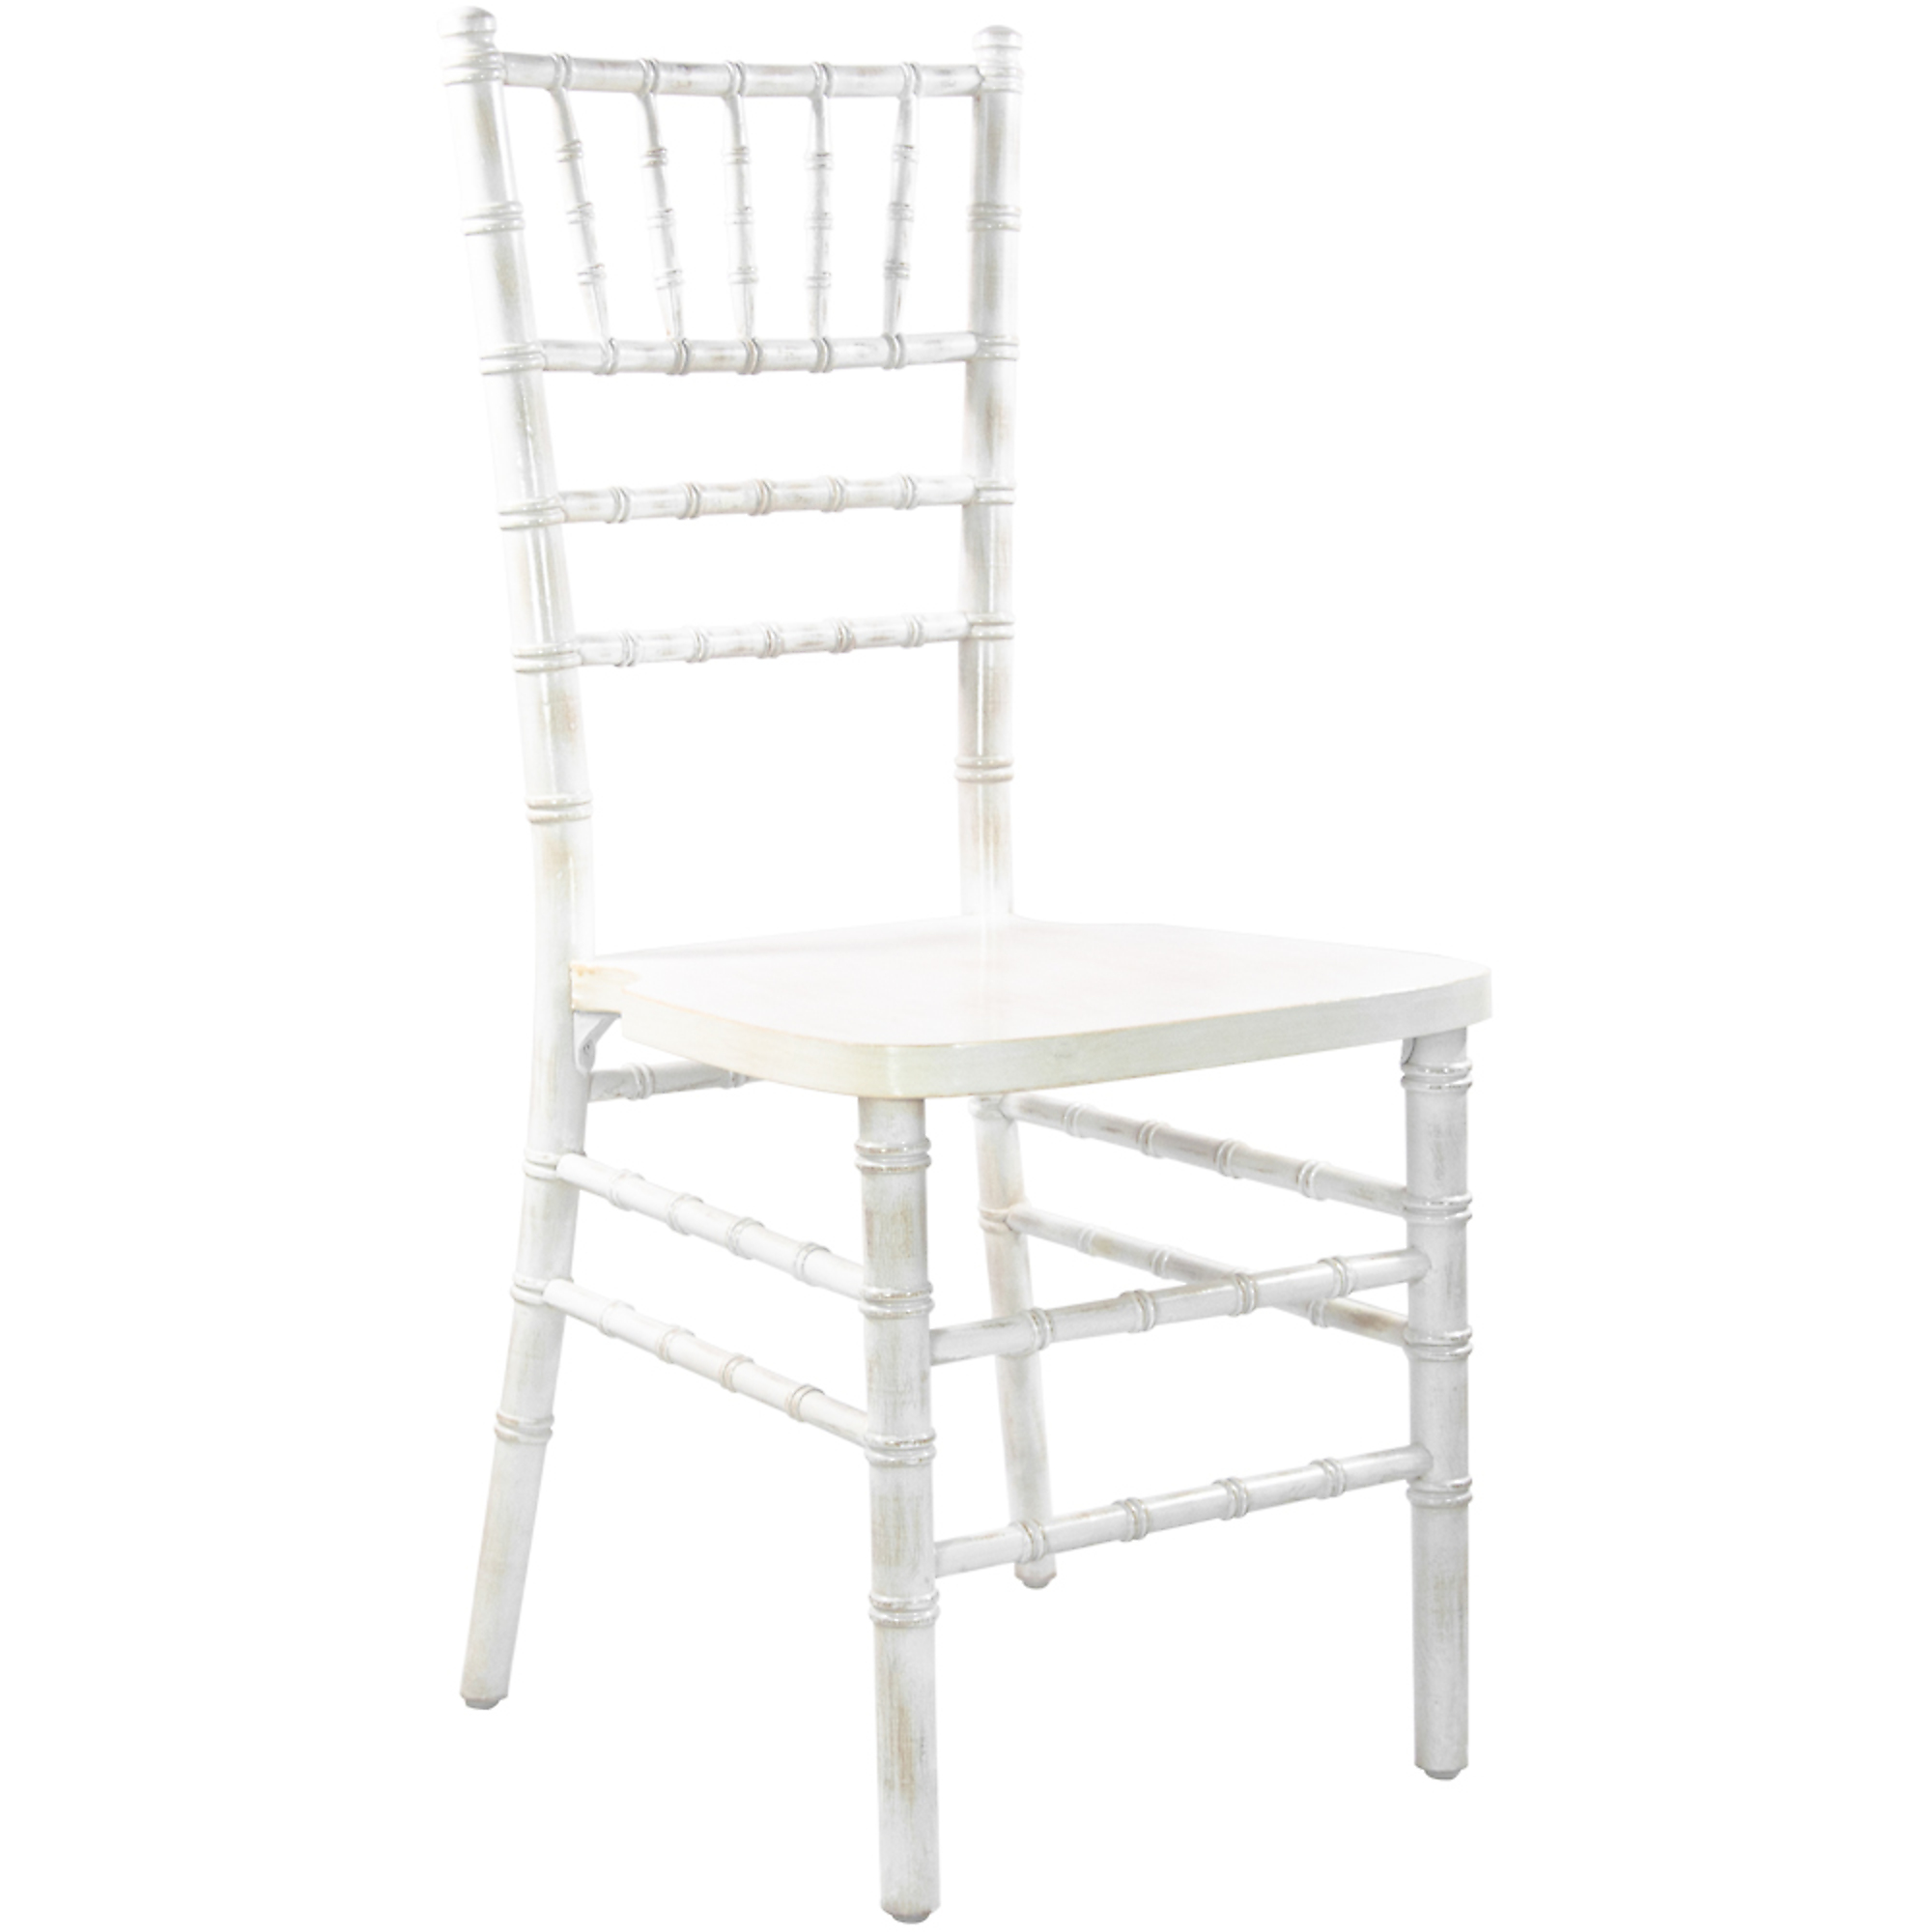 Flash Furniture, Lime Wash Chiavari Chair, Primary Color White, Included (qty.) 1, Model WDCHILW